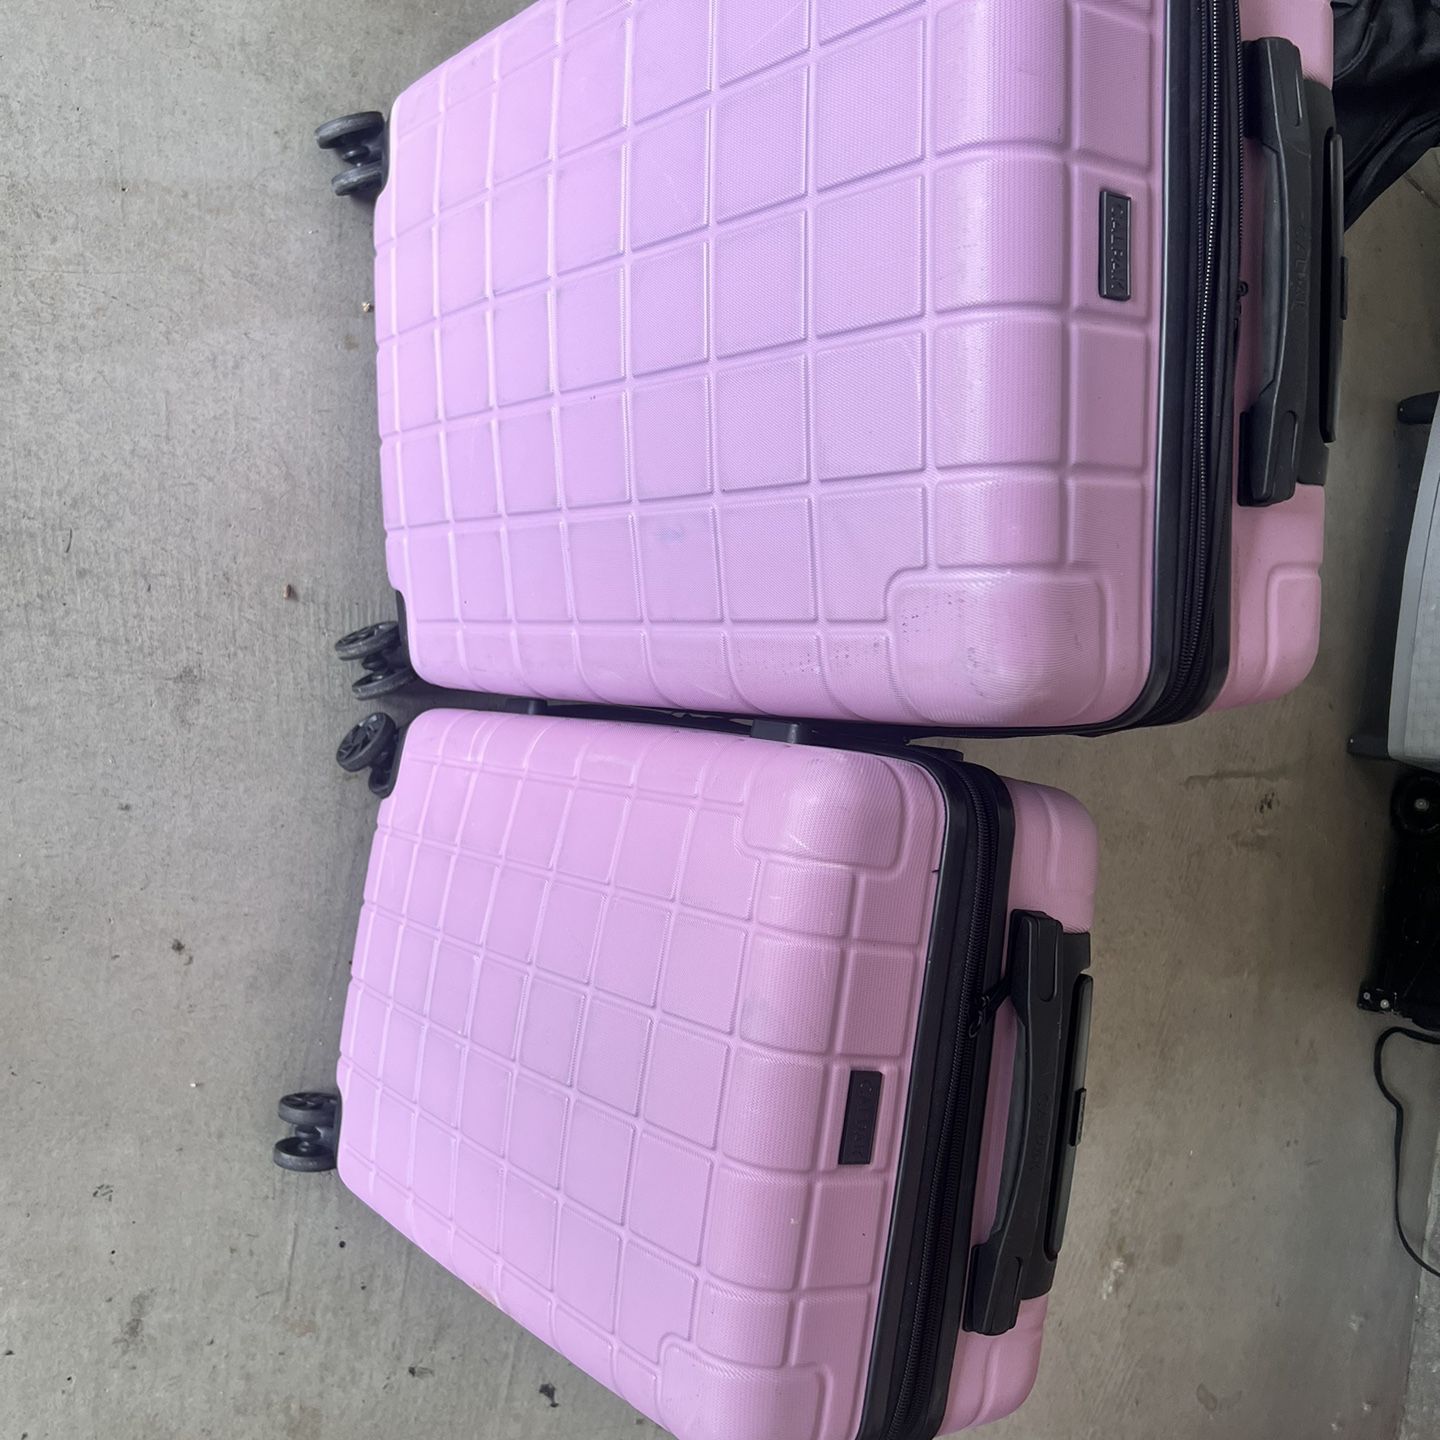 Luggage Set 3 Pieces for Sale in San Diego, CA - OfferUp